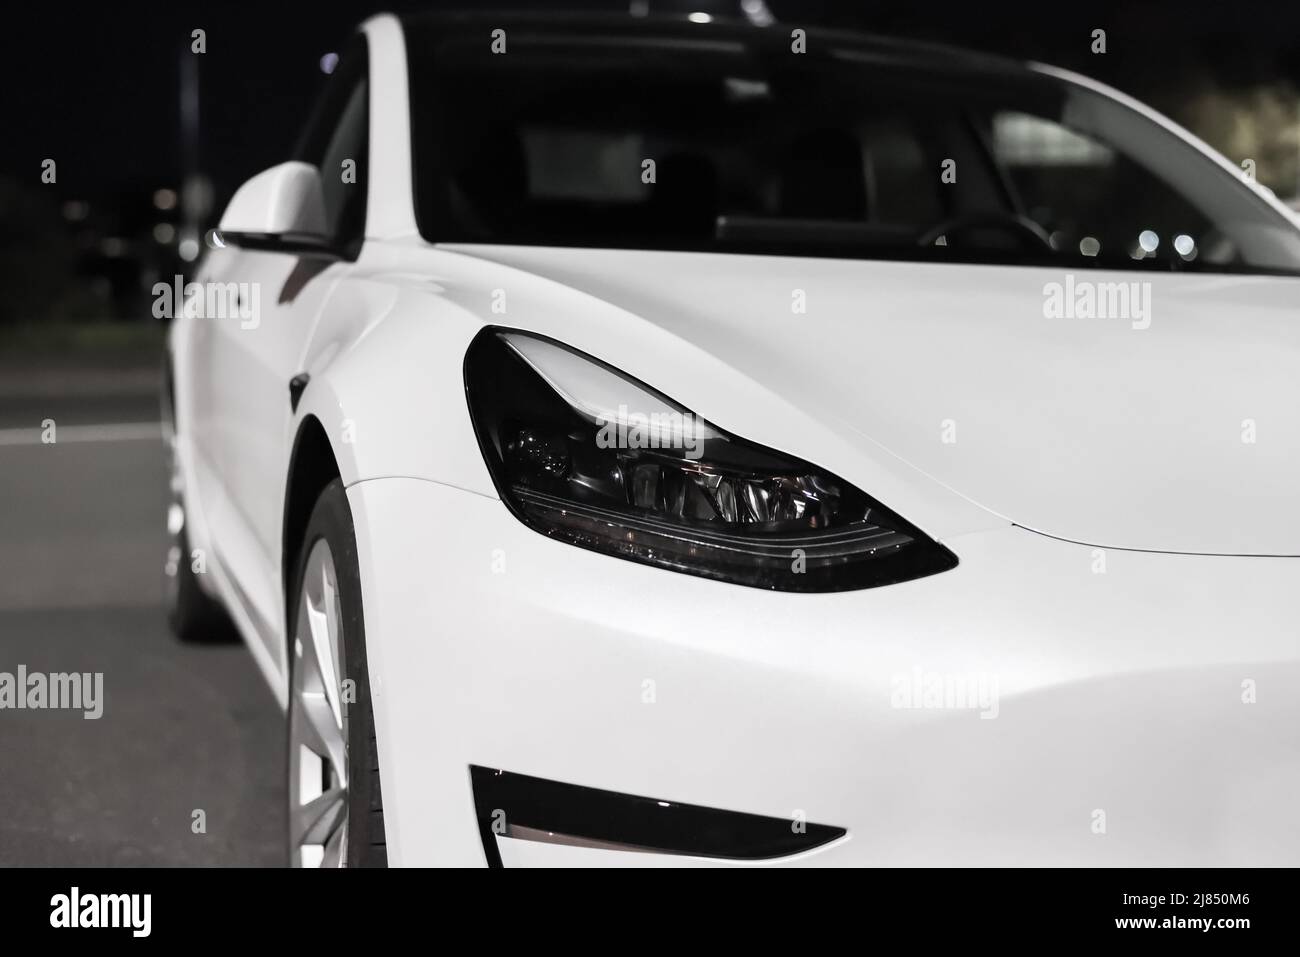 Front view of Tesla electric car. Design, exterior and appearance of white electric car of Tesla Motors automotive company: Riga, Latvia - September 2 Stock Photo